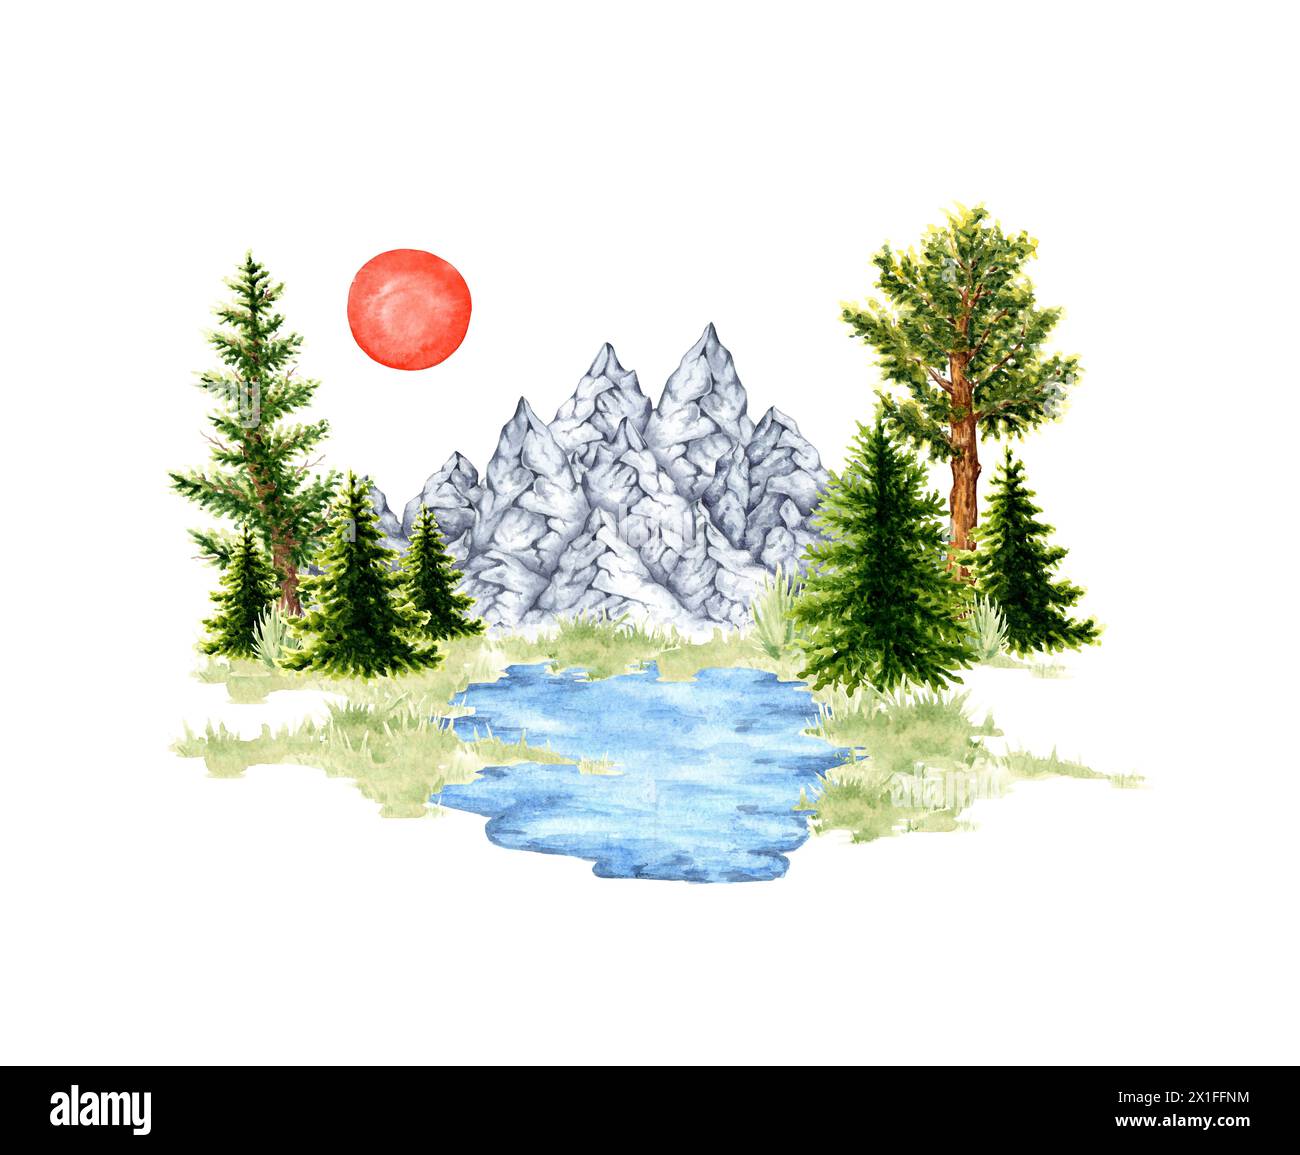 Watercolor illustration of natural landscape. Forest wildlife scene with green grass, green trees, mountain ranges, lake and sun. Create design compos Stock Photo